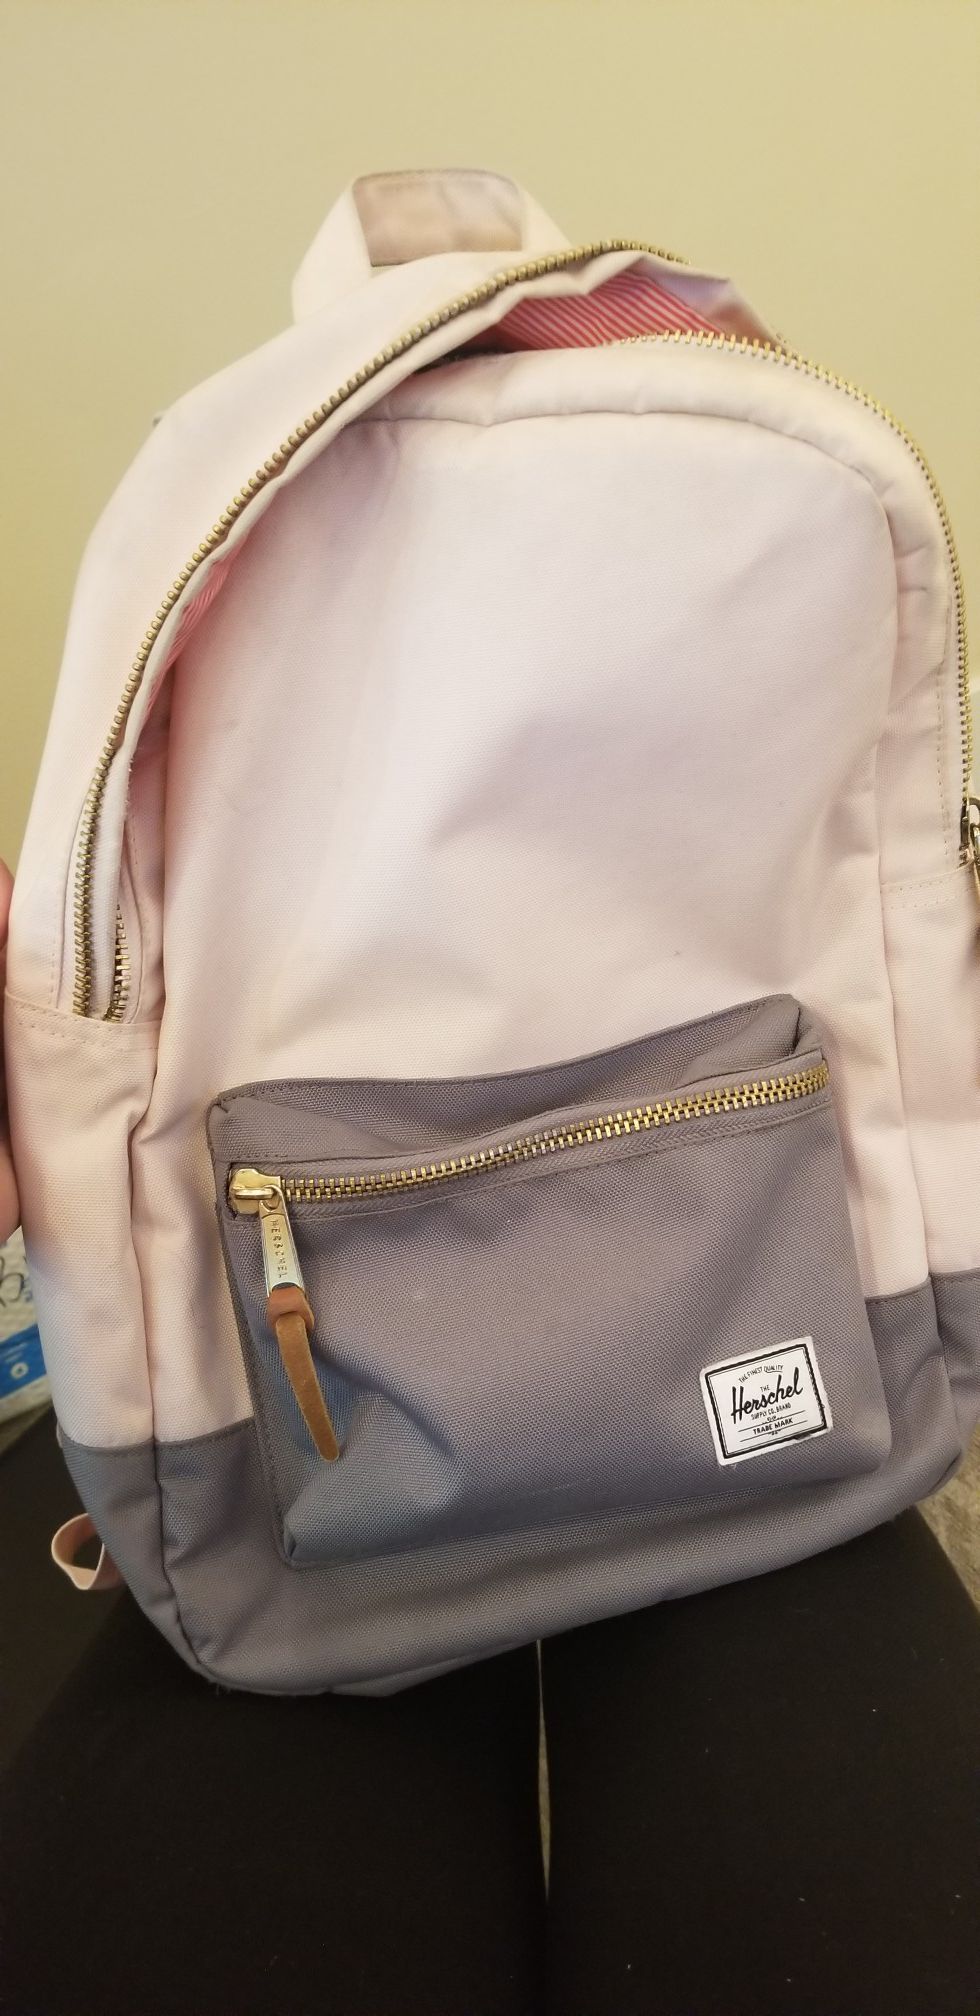 Pink and gray Herschel backpack for Sale in Bothell, WA - OfferUp